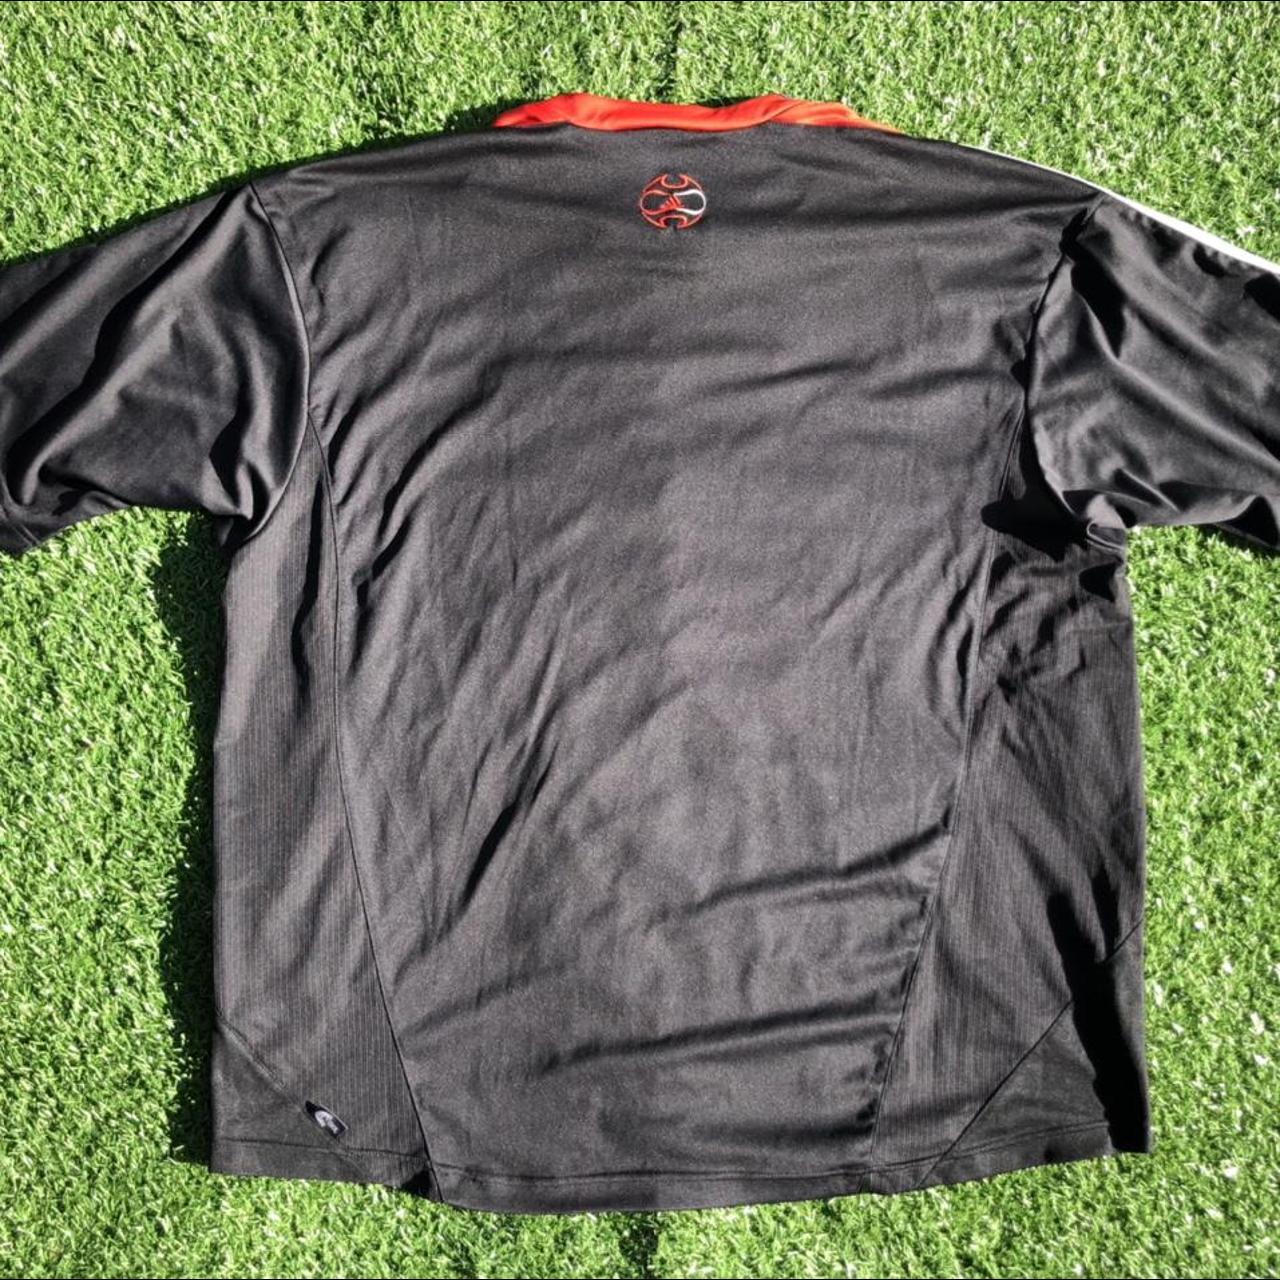 Product Image 3 - Adidas Climacool Sports Training Top
-